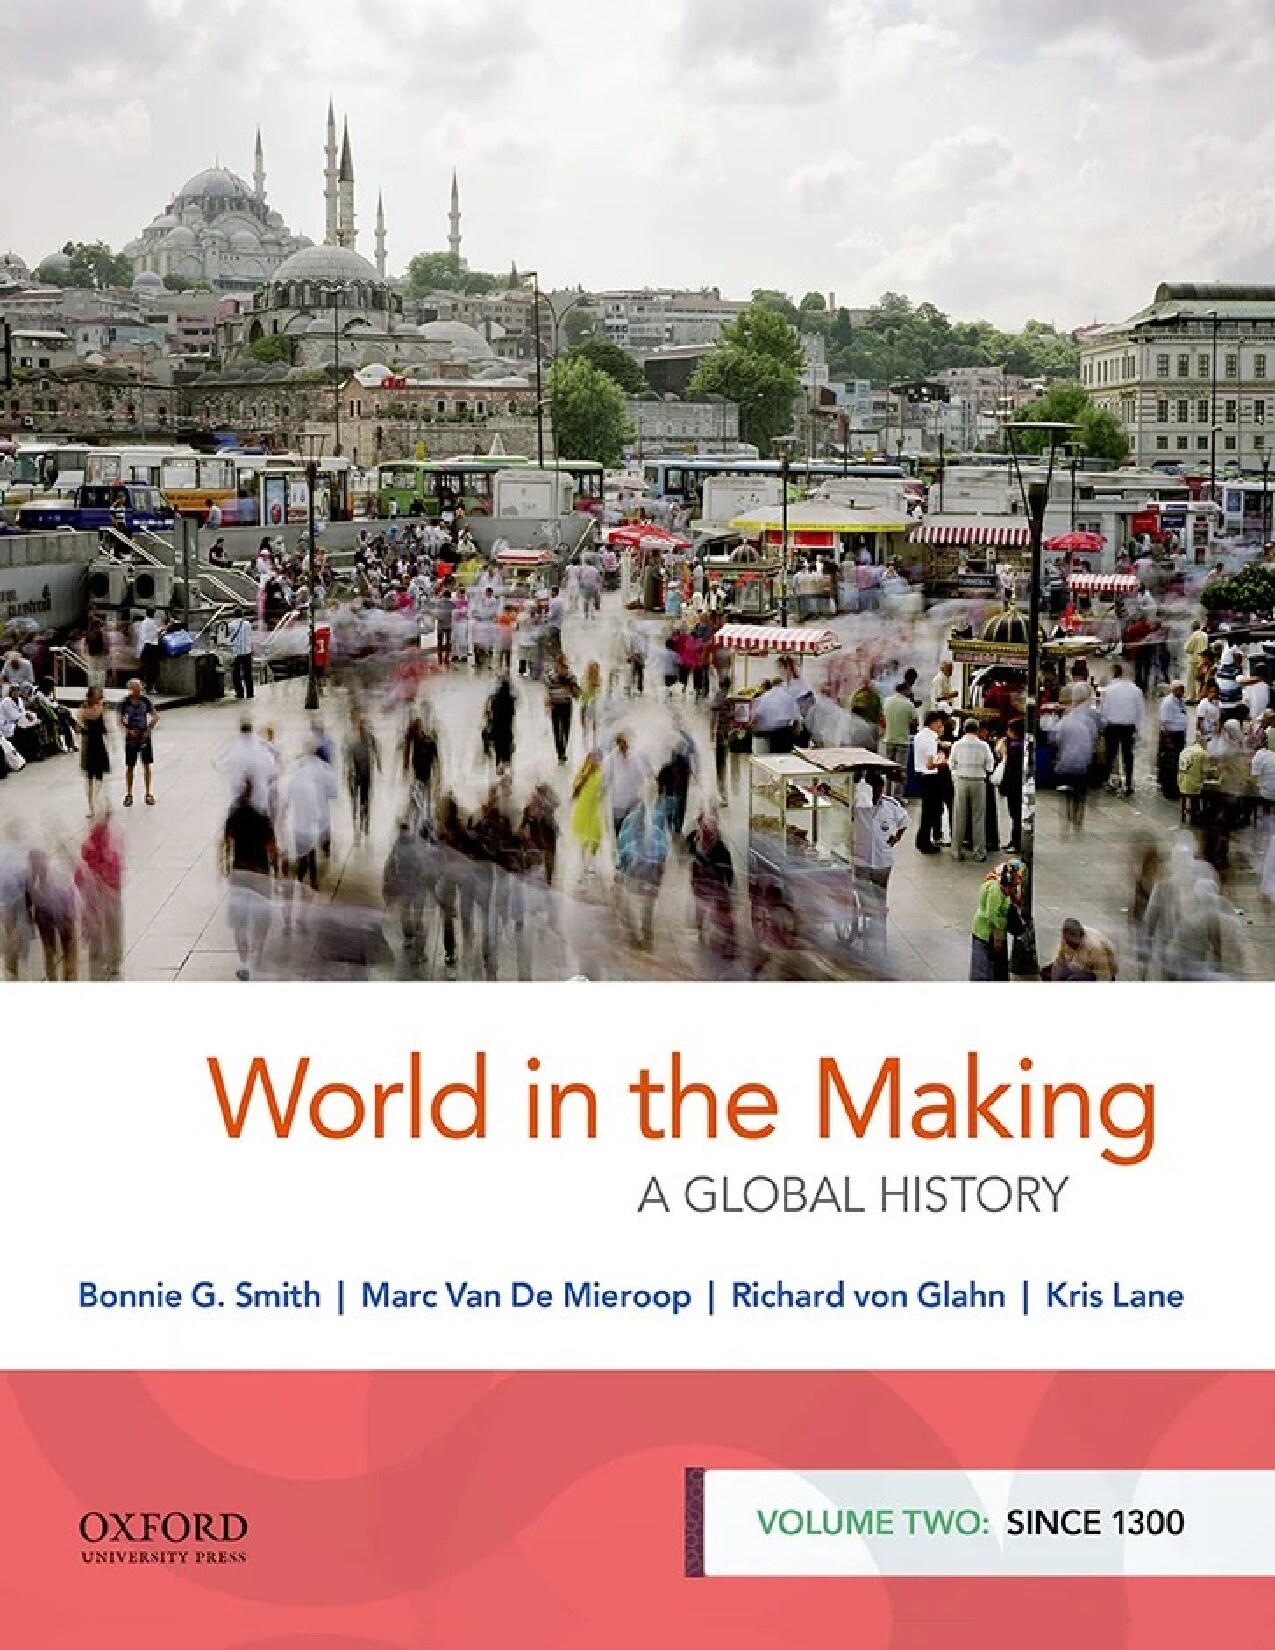 World in the Making: A Global History - Volume 2: Since 1300